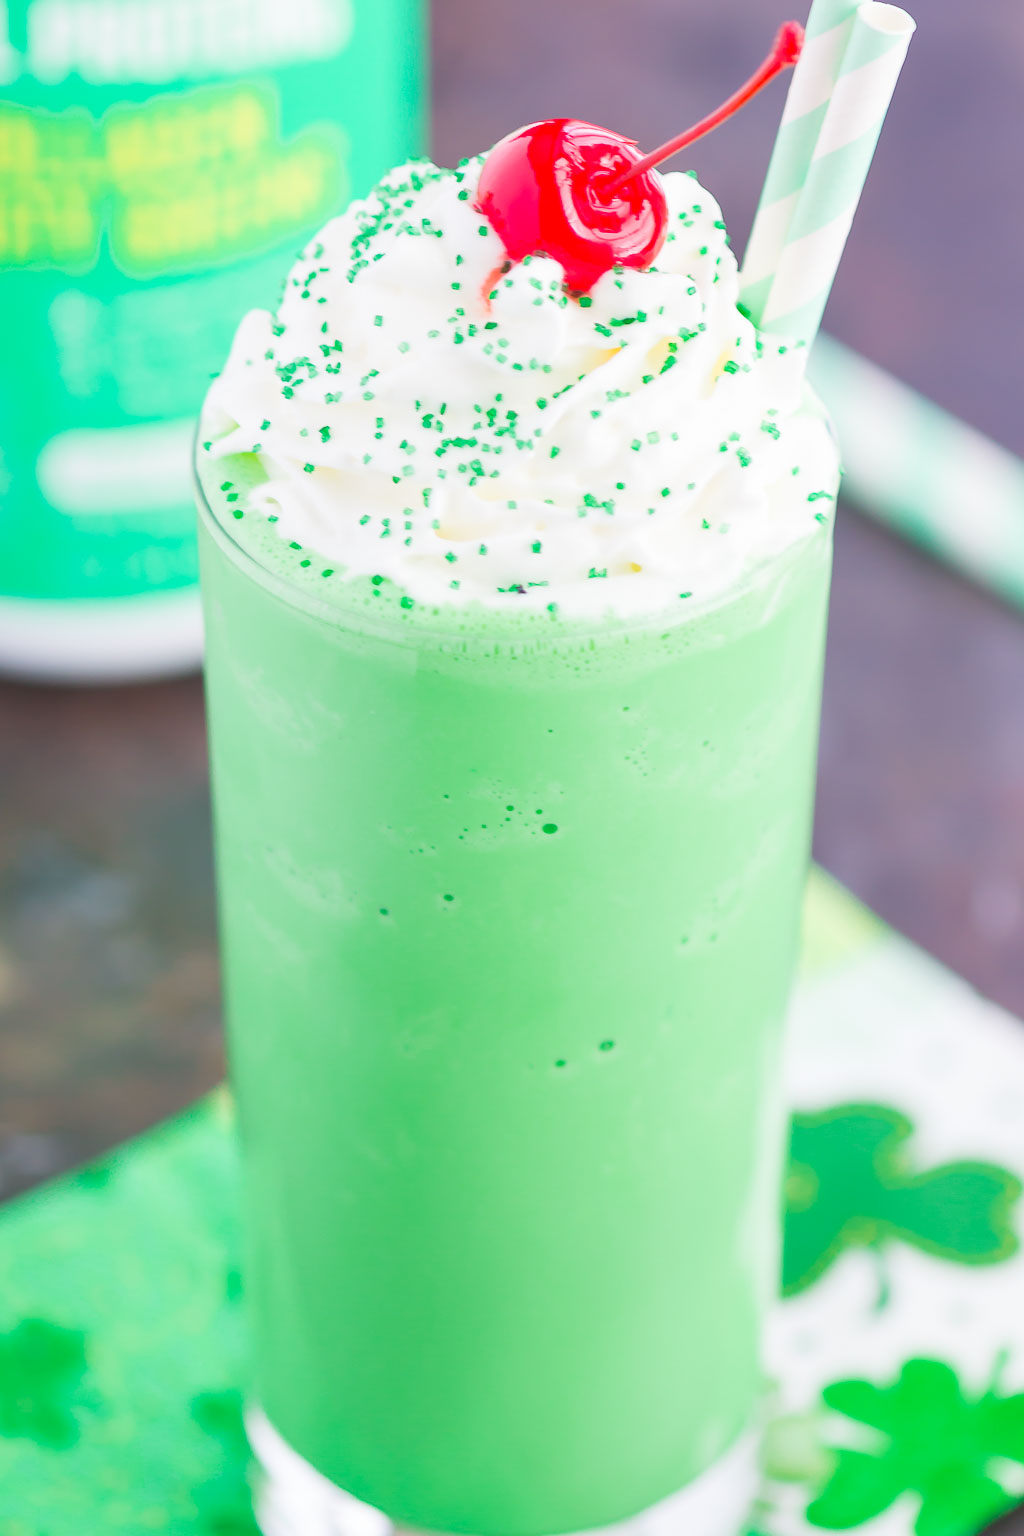 Skip the drive-thru and make your own Copycat Shamrock Shake. Sweet vanilla ice cream and a touch of mint are blended together until smooth and creamy. Topped with whipped cream and a cherry, you'll be making this minty shake all year long!